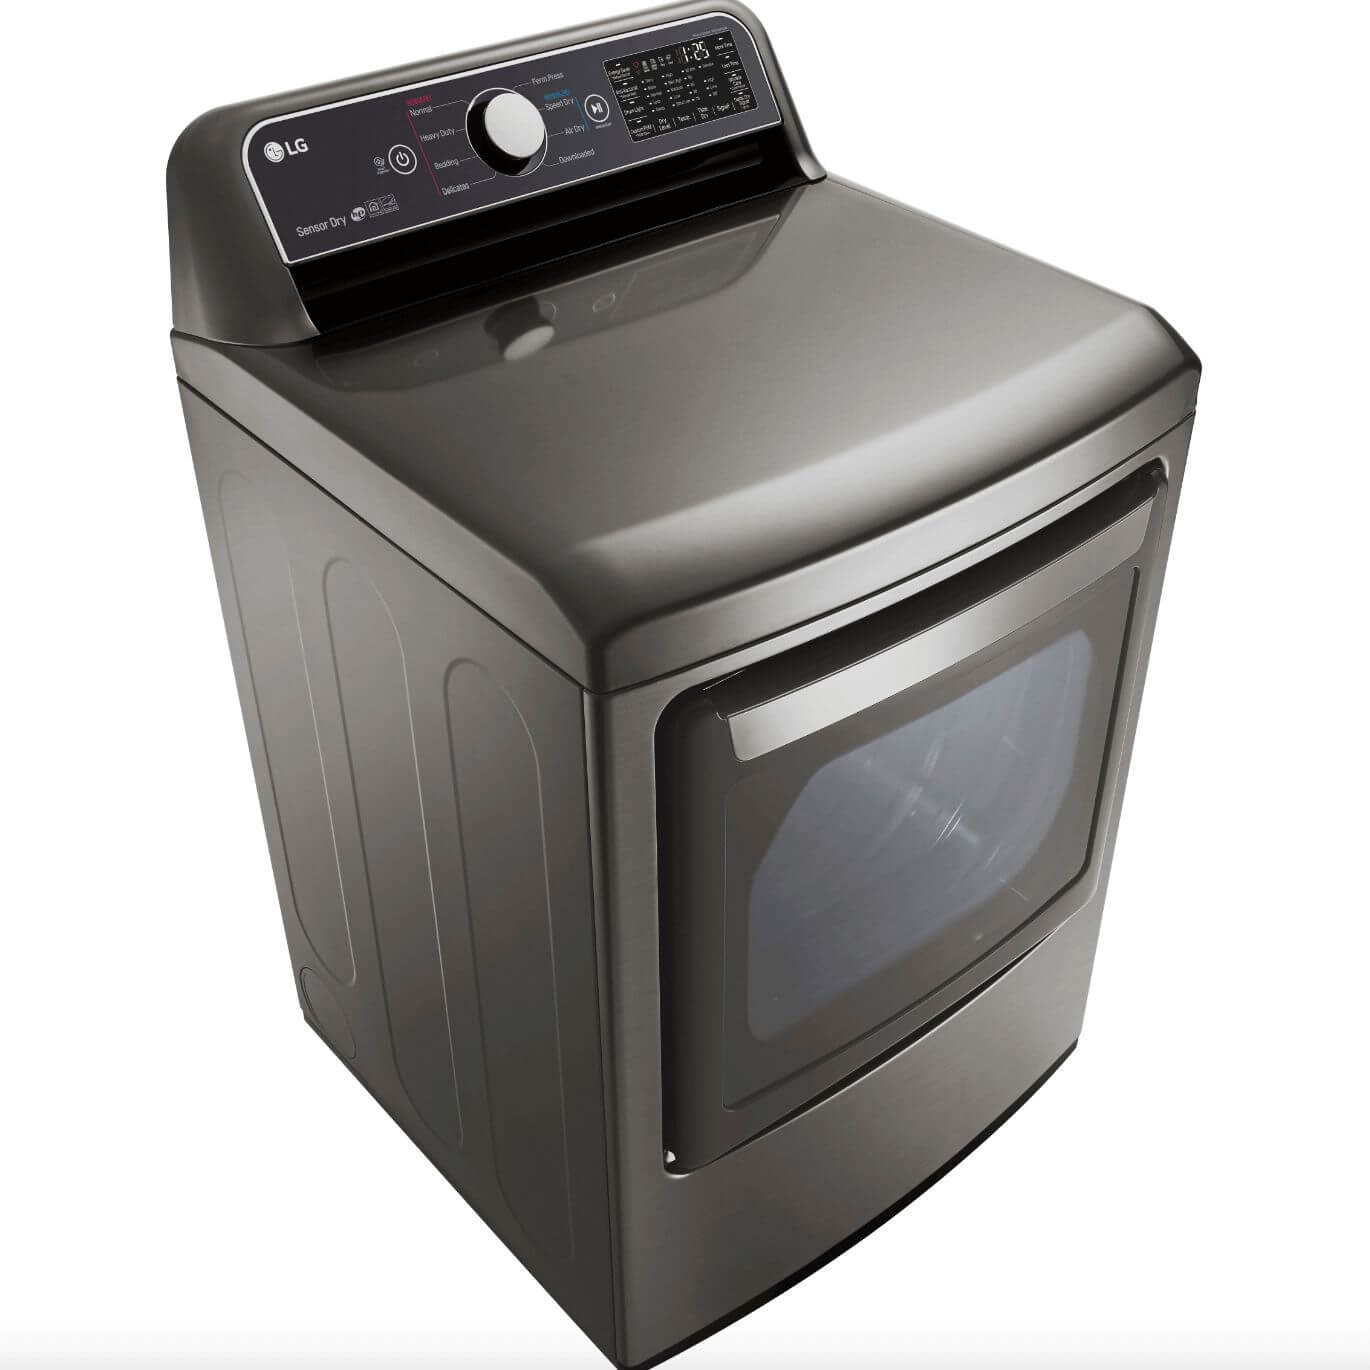 LG 27 Inch Rear Control Front Load Gas Dryer in Graphite Steel 7.3 cu. ft. (DLG7301VE)